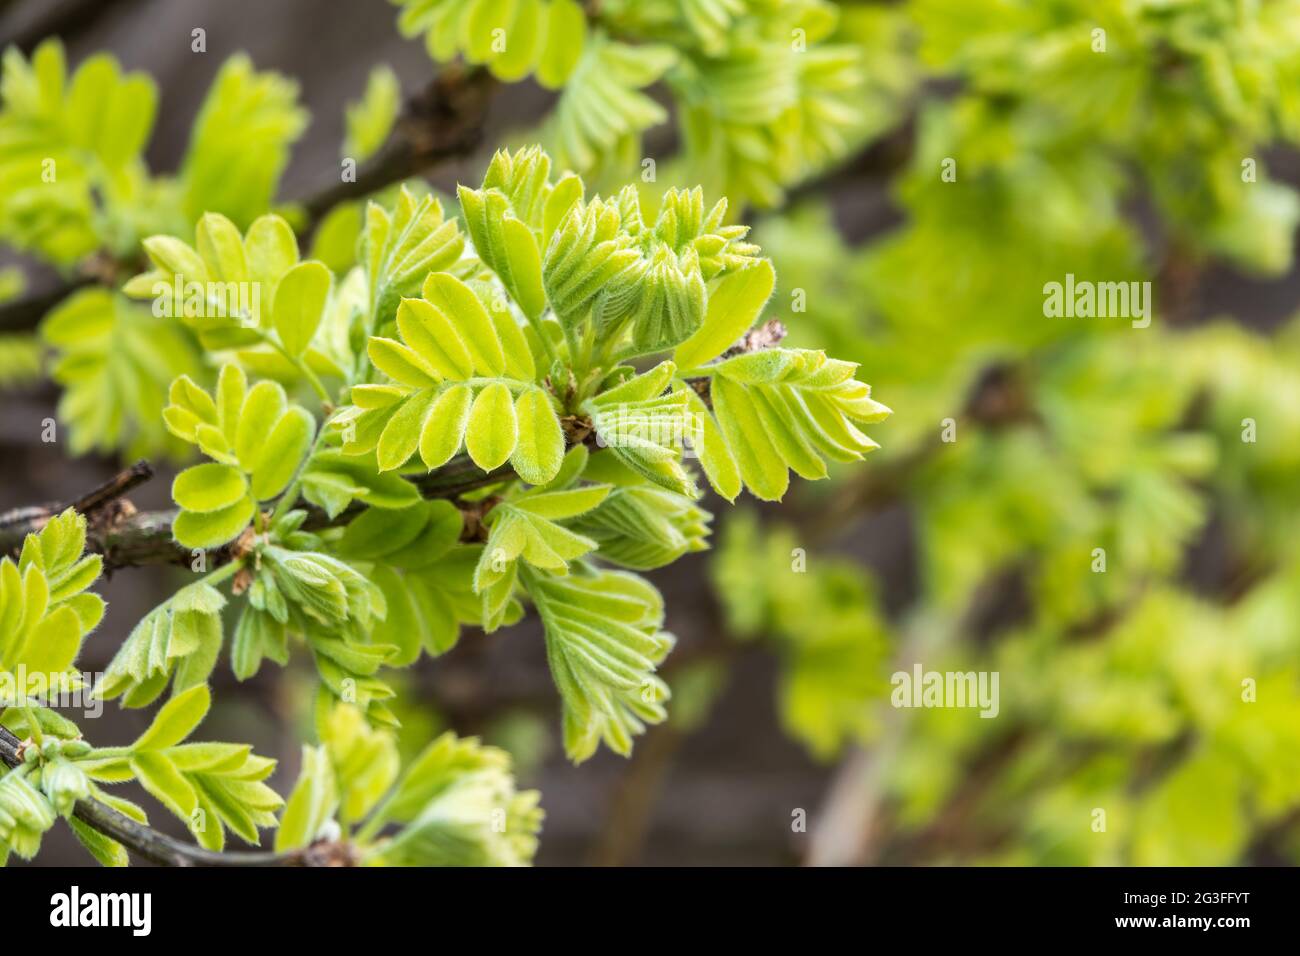 Green bushes with young leaves in the sunset. Background springtime image. Caragana arborescens, the Siberian peashrub, Siberian pea-tree, or caragana Stock Photo